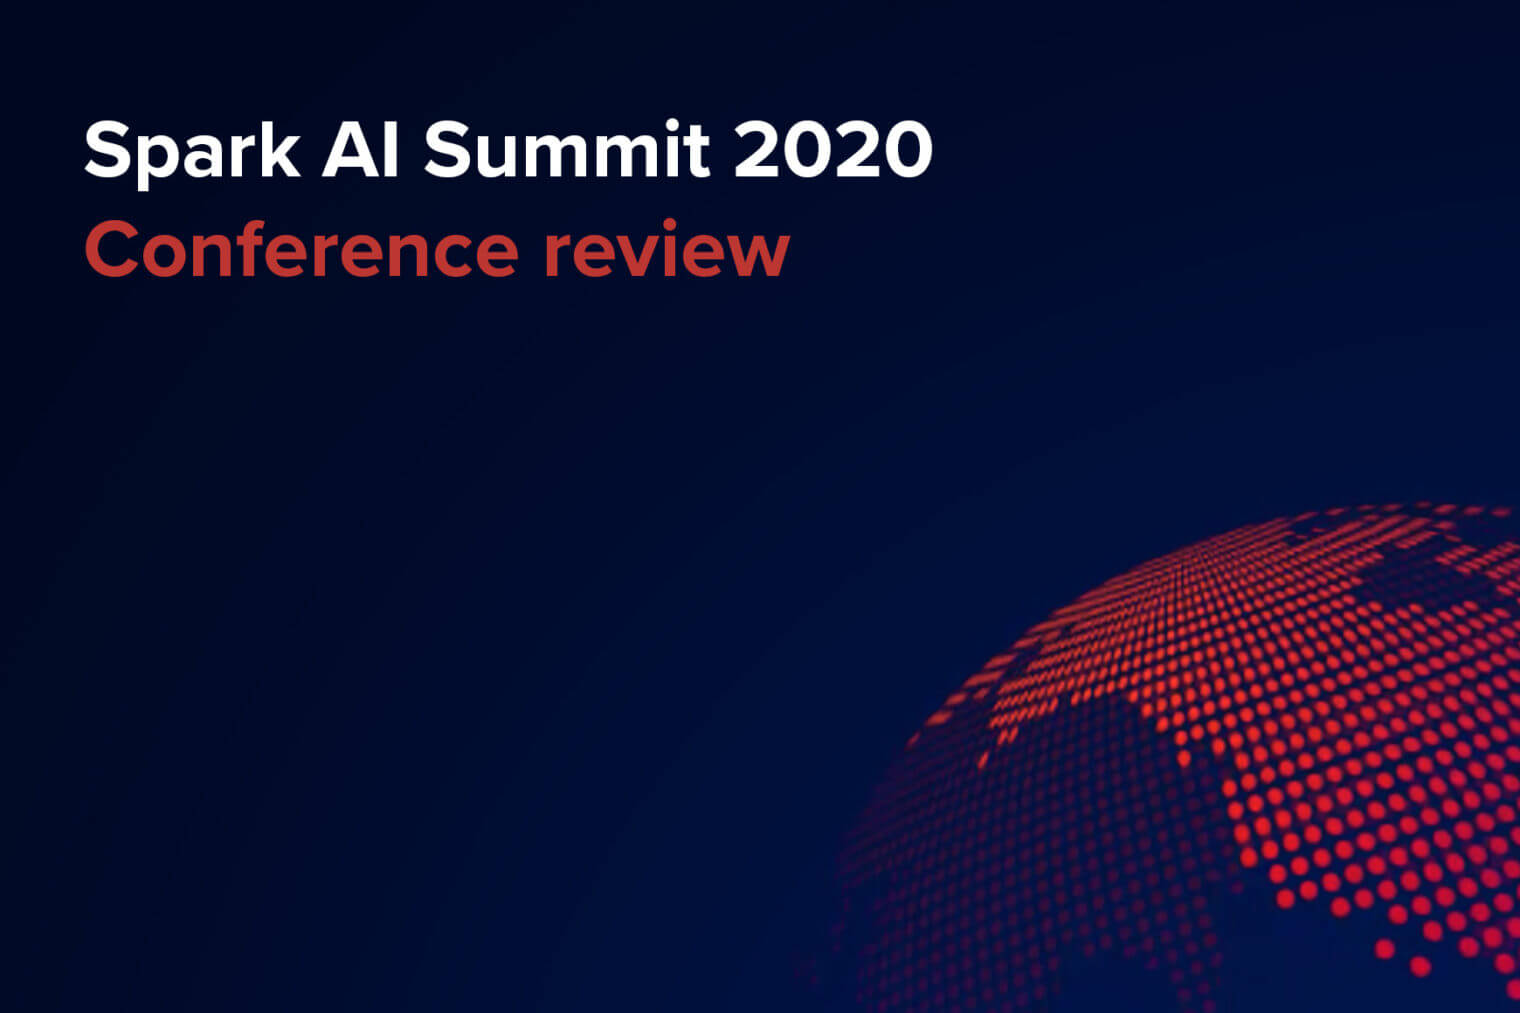 Spark AI Summit what is new in the world of big data?